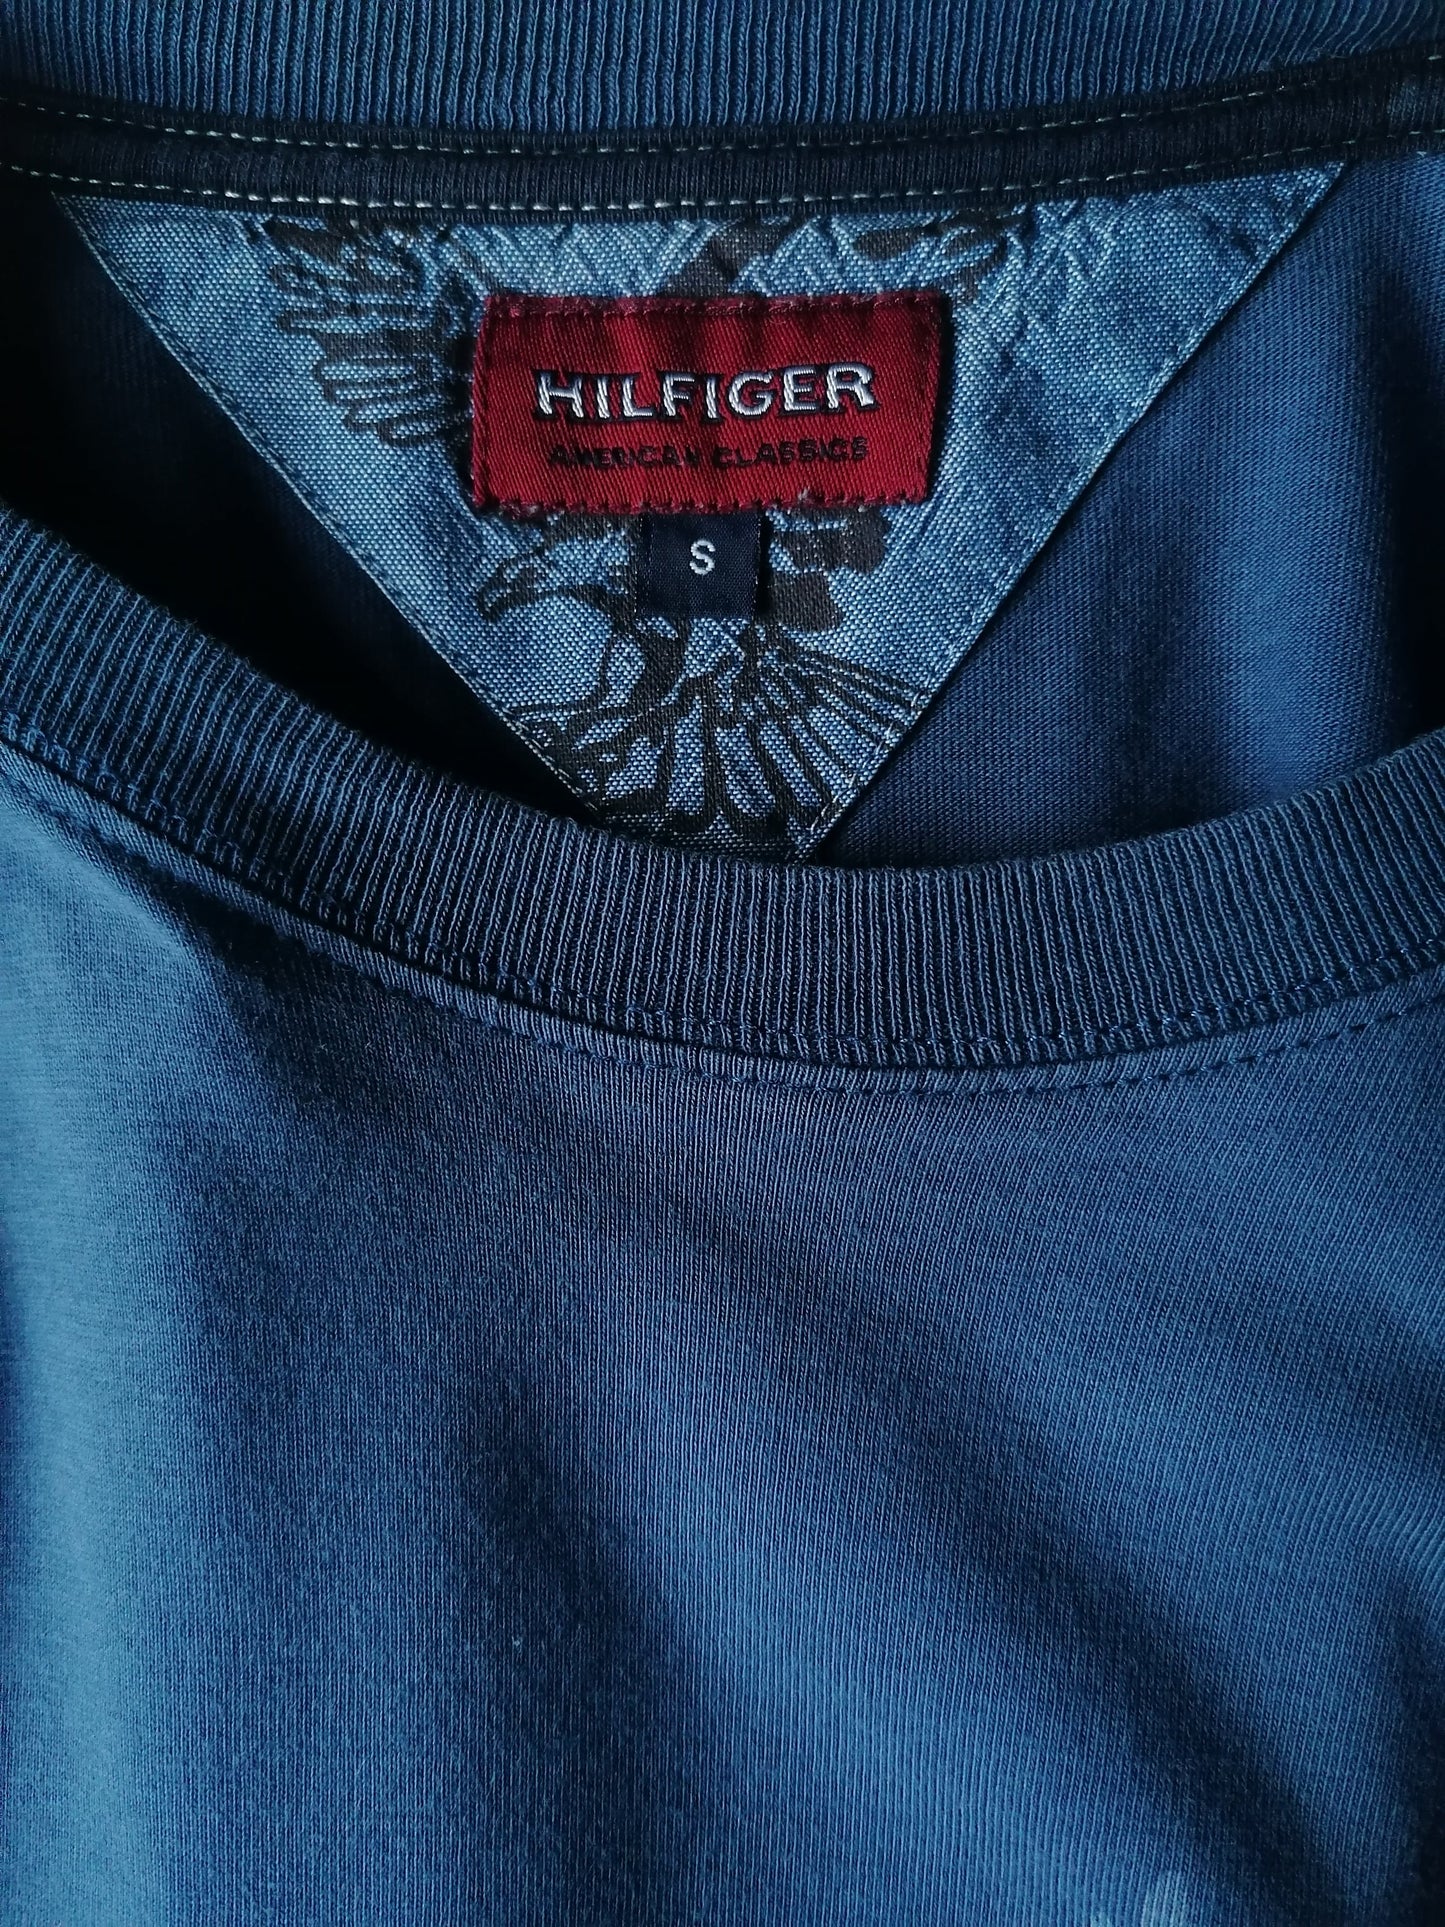 Tommy Hilfiger Longsleeve. Blue colored. Size S.